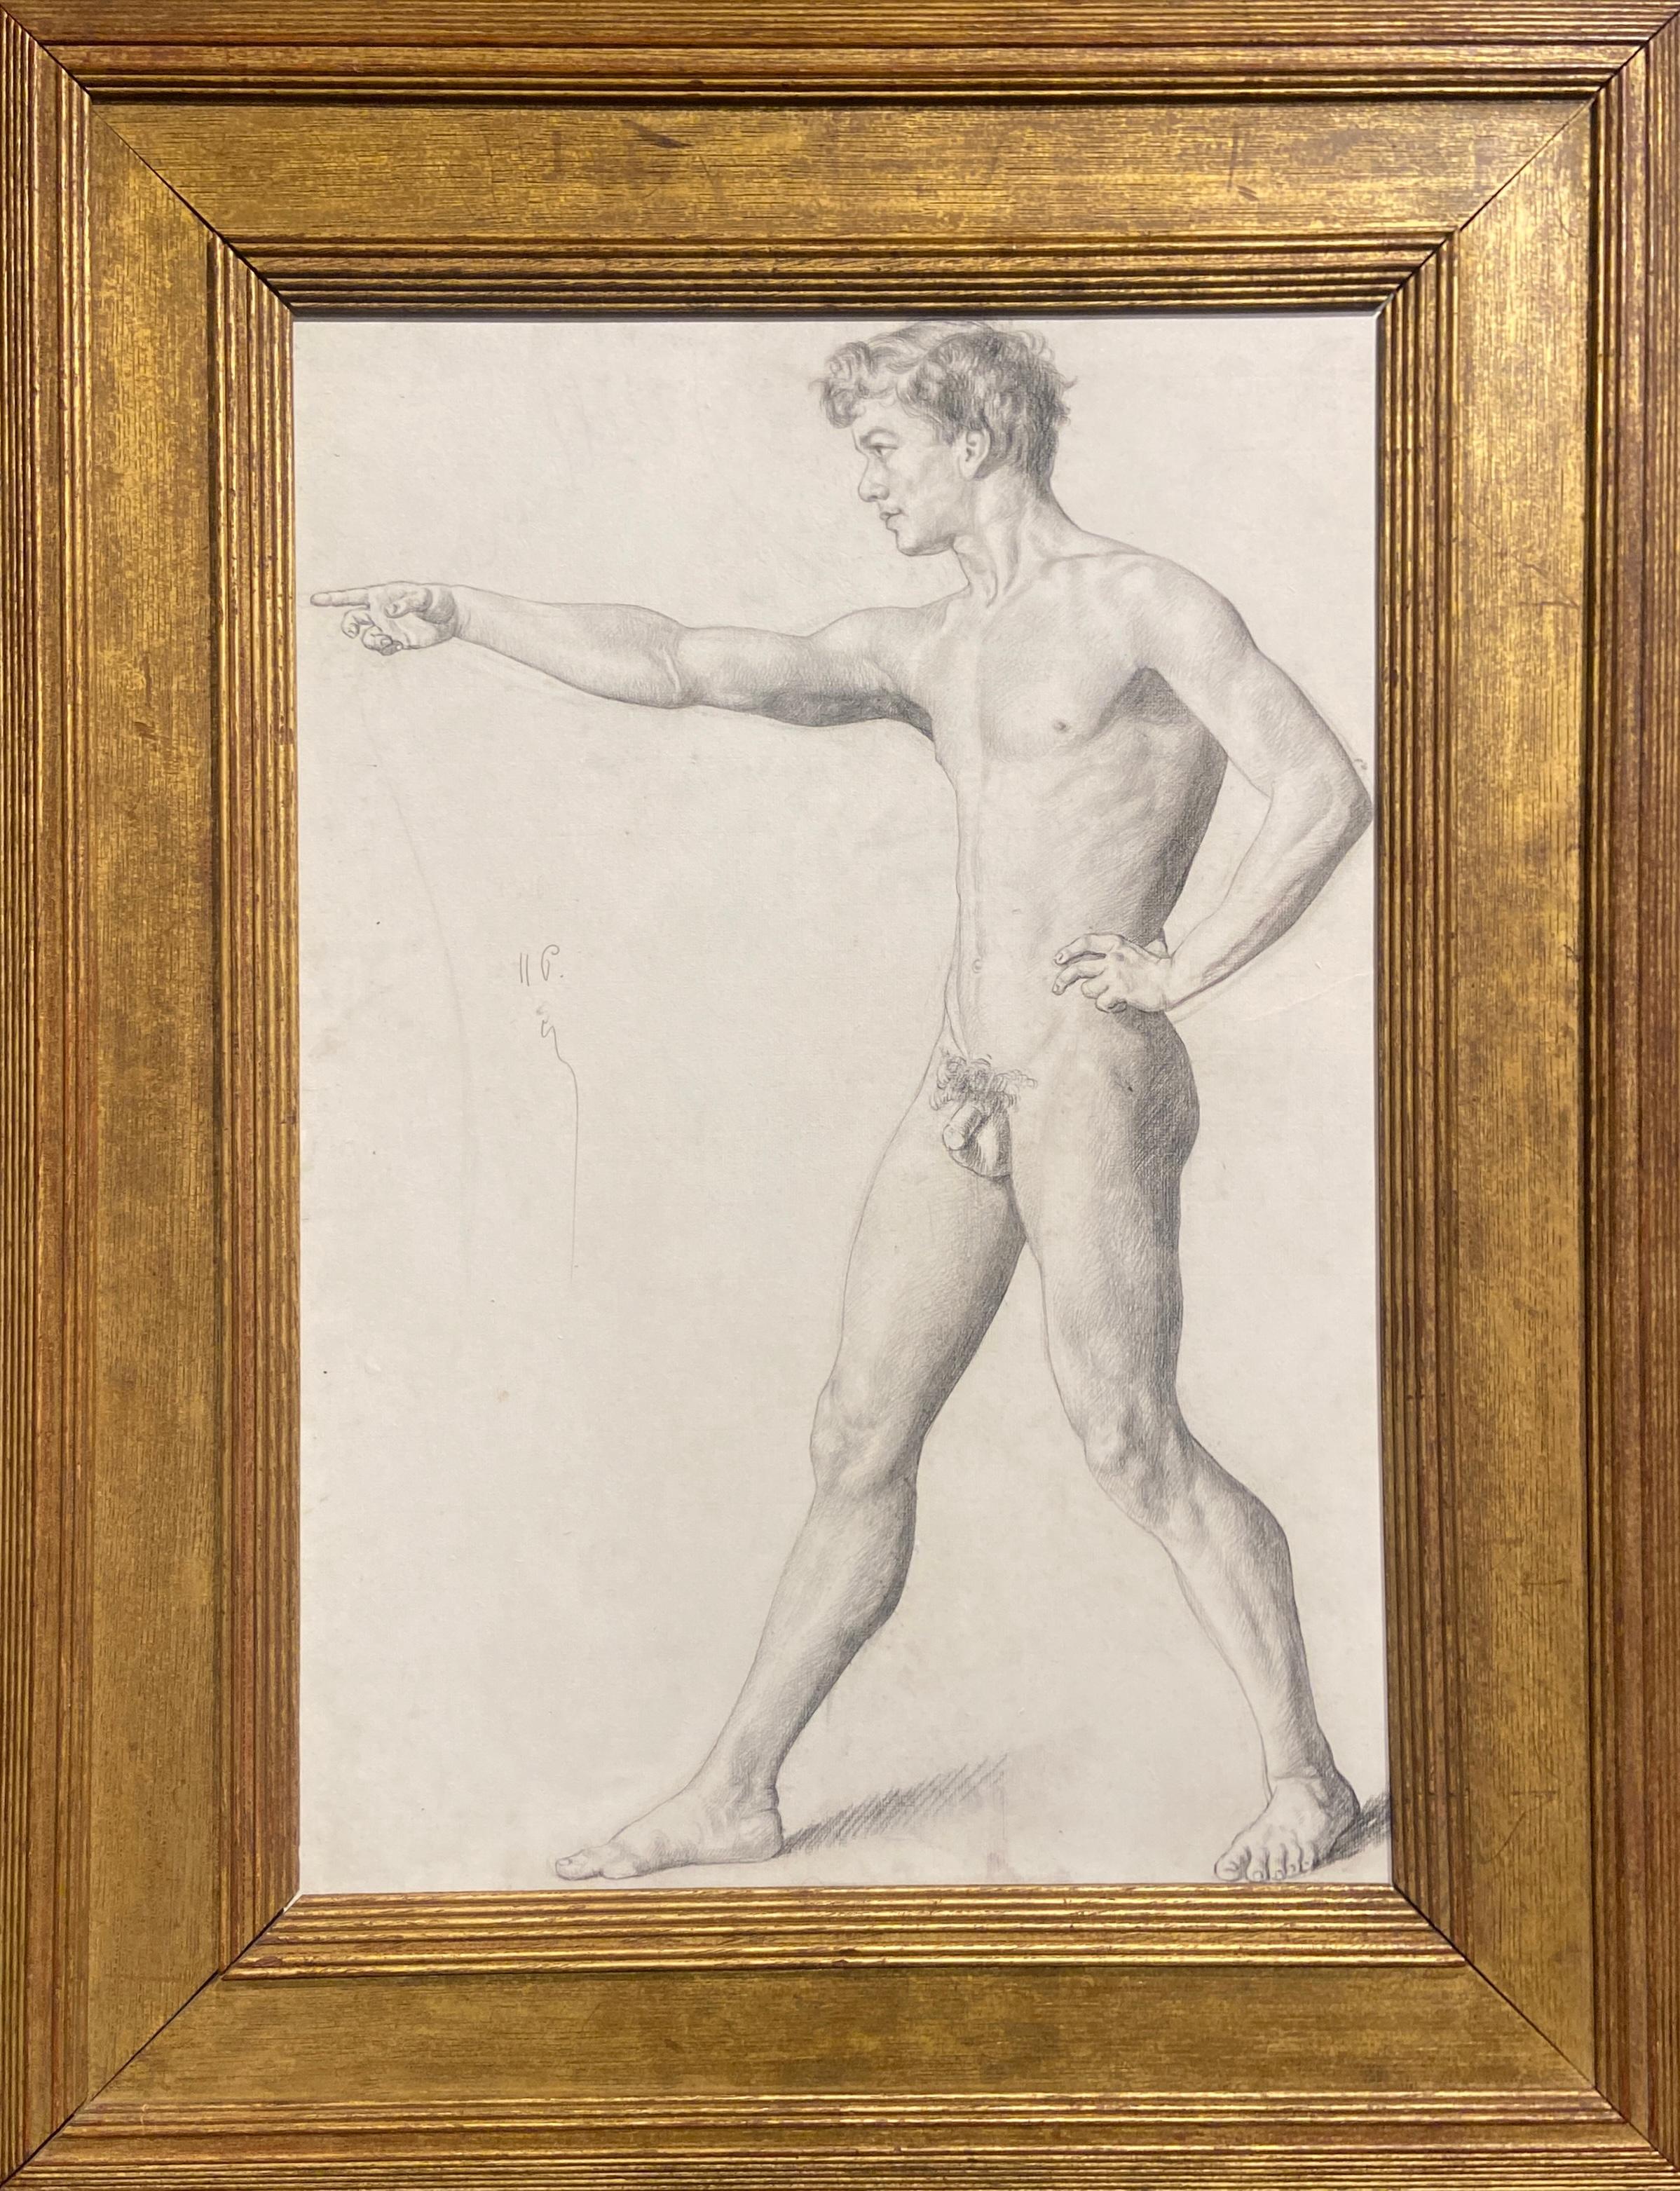 Anatomy of Man, Signed Graphite Nude Sketch on Paper, 19th Century French Artist For Sale 1